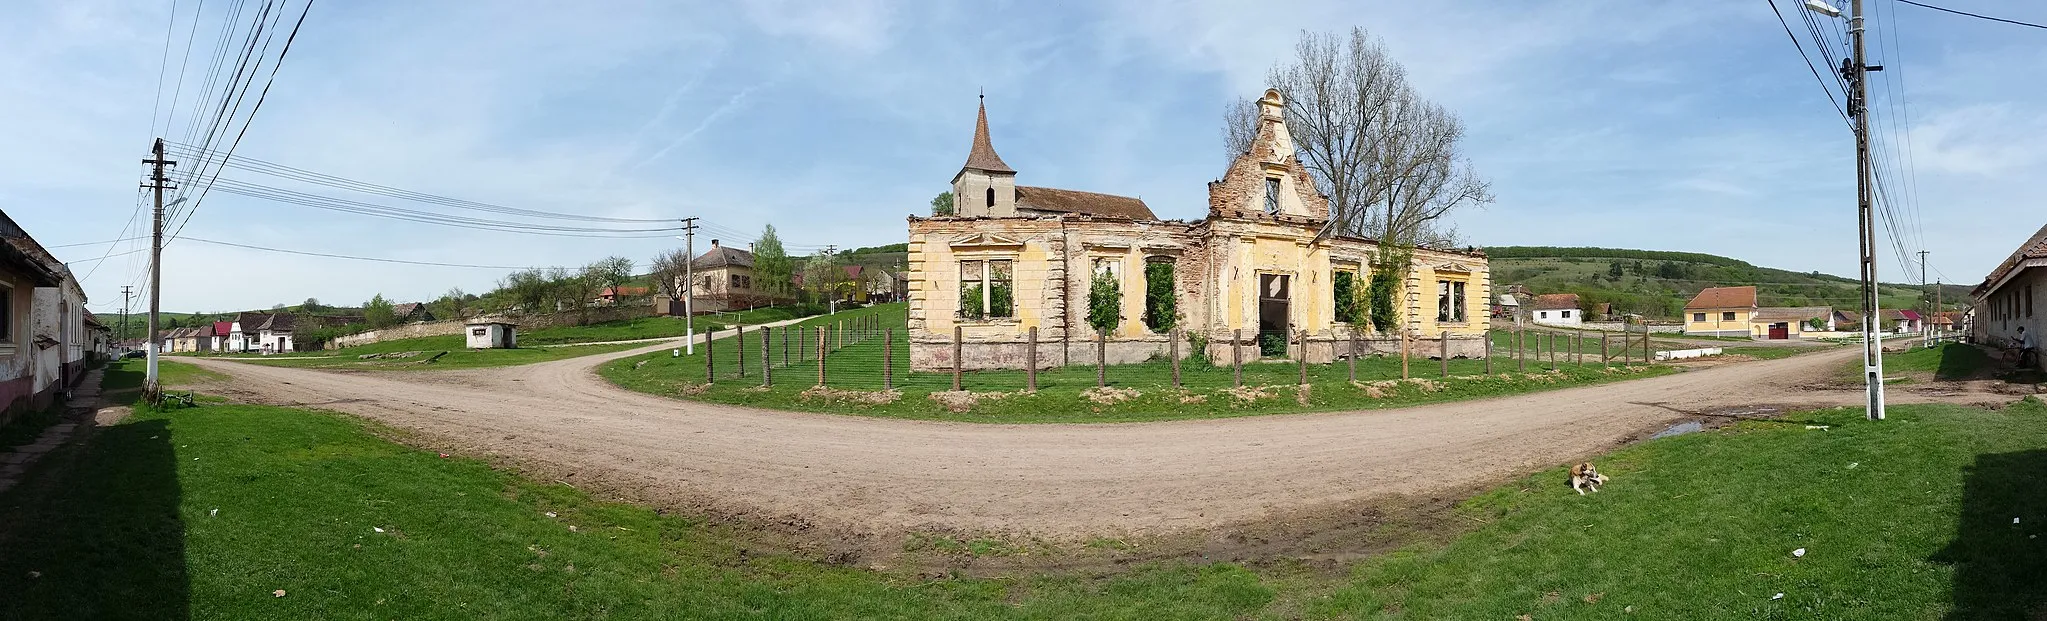 Photo showing: Felmer panorama 1 - Ruin in the center is the former town hall